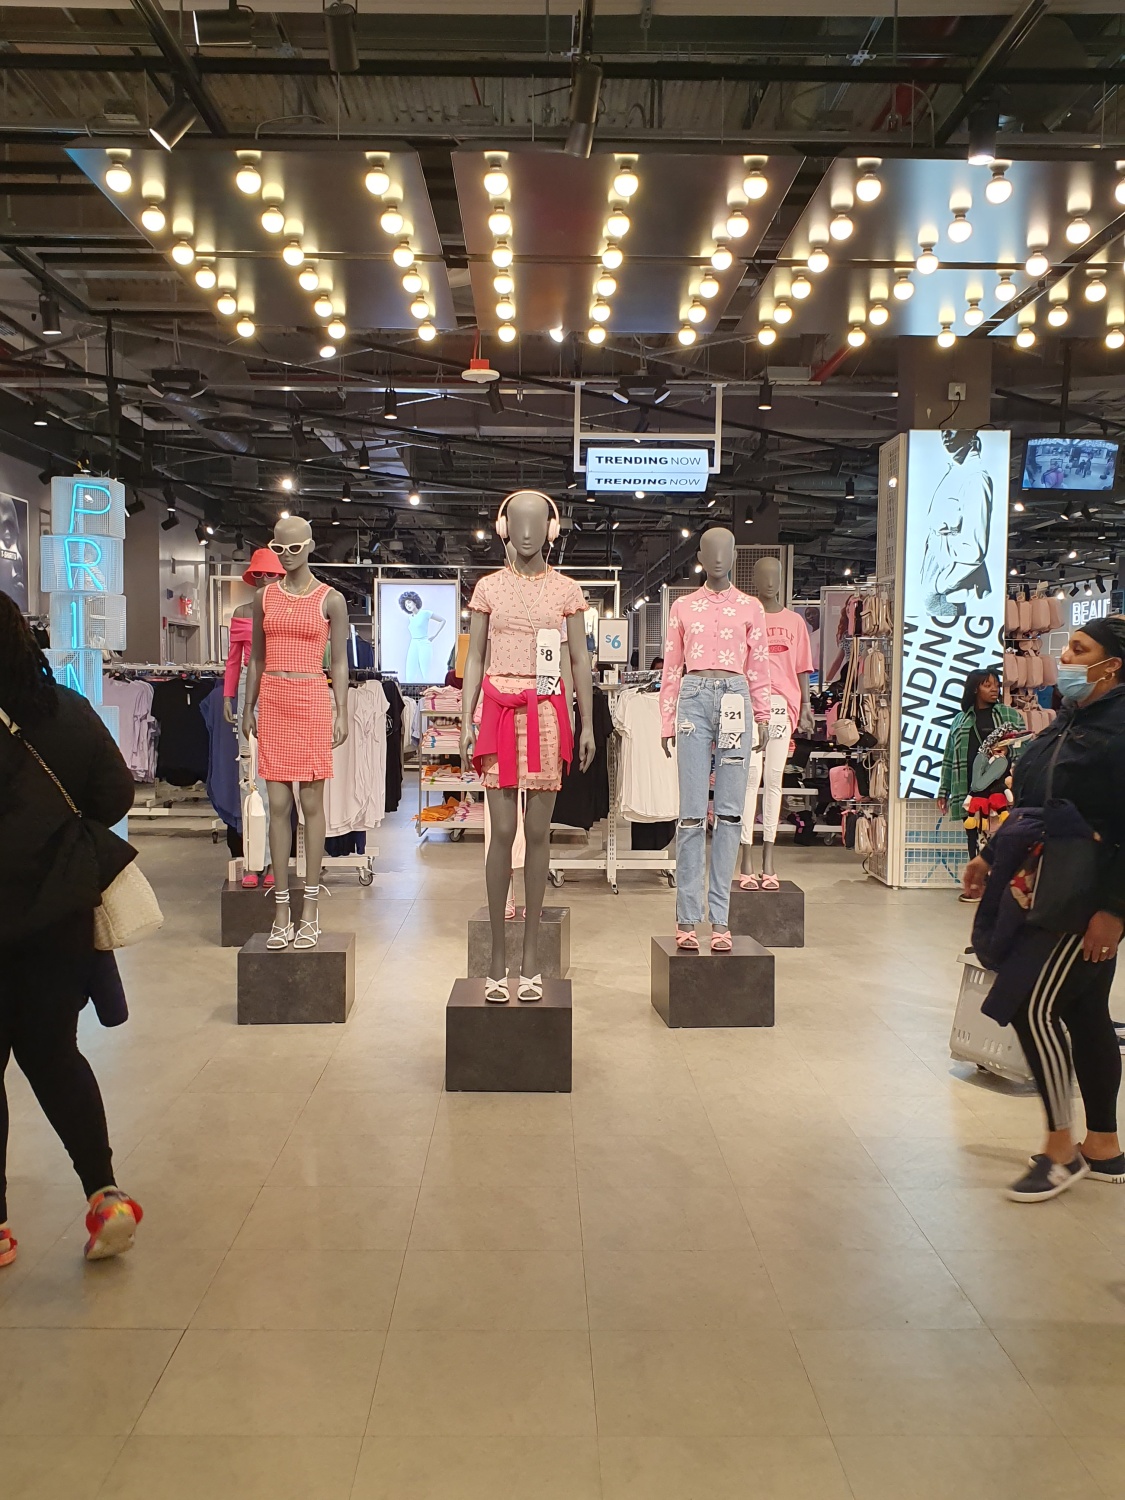 Primark Opens First Long Island Store at Roosevelt Field Mall